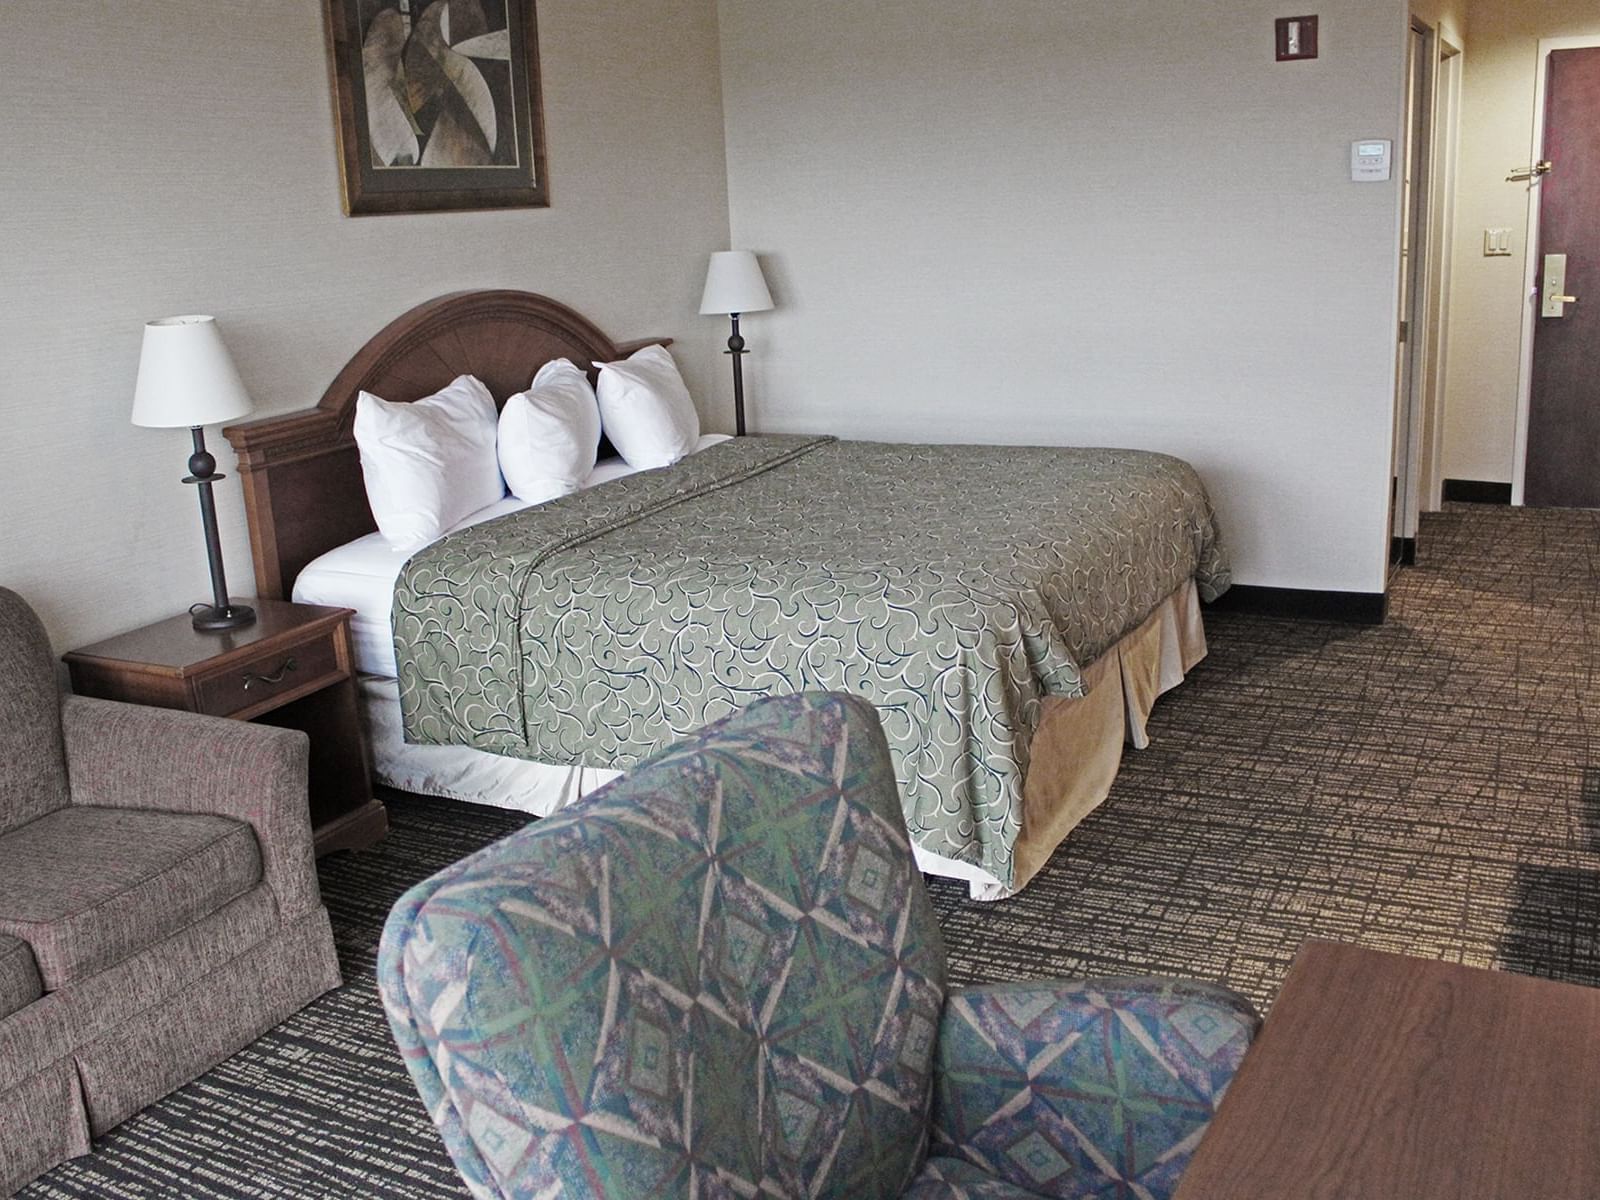 The Accessible Executive King Guest Room features a refrigerator, microwave, and a generous seating area with a sleeper sofa.